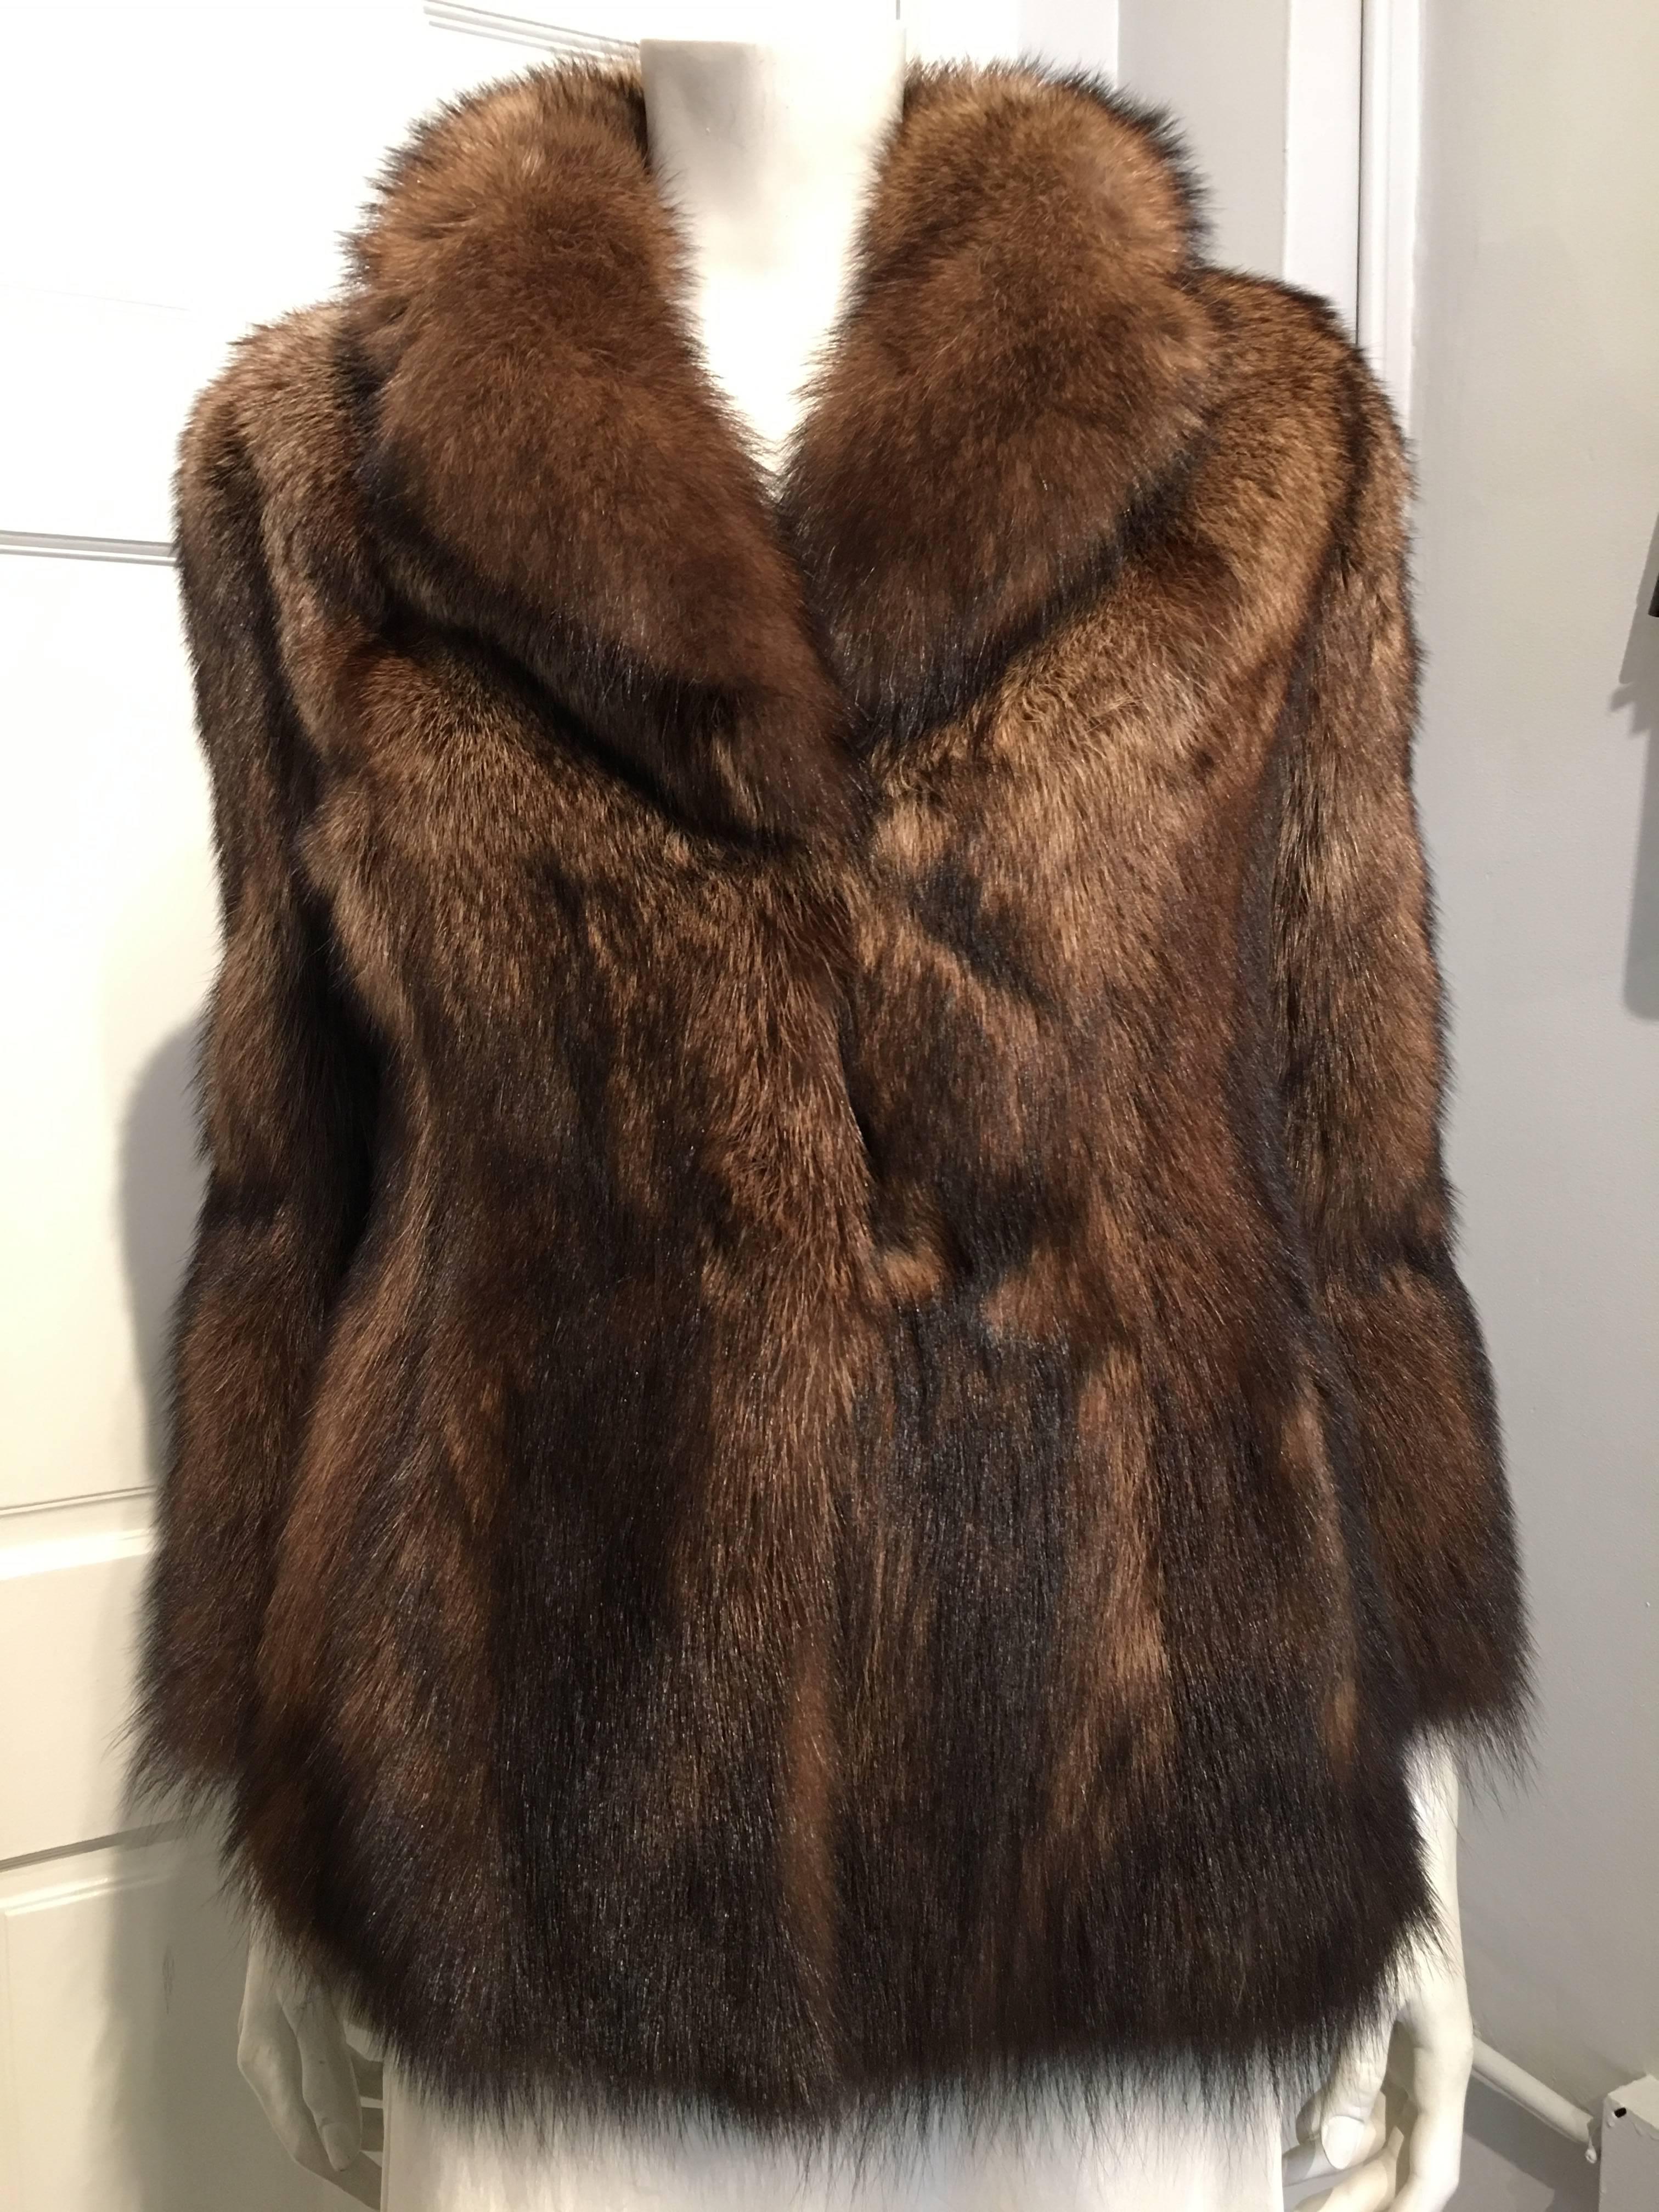 Prada brown racoon jacket with pelts getting darker at the bottom of the body and full length sleeves. The jacket closes with three concealed hooks.
The furs used in this piece are from Saga Furs.